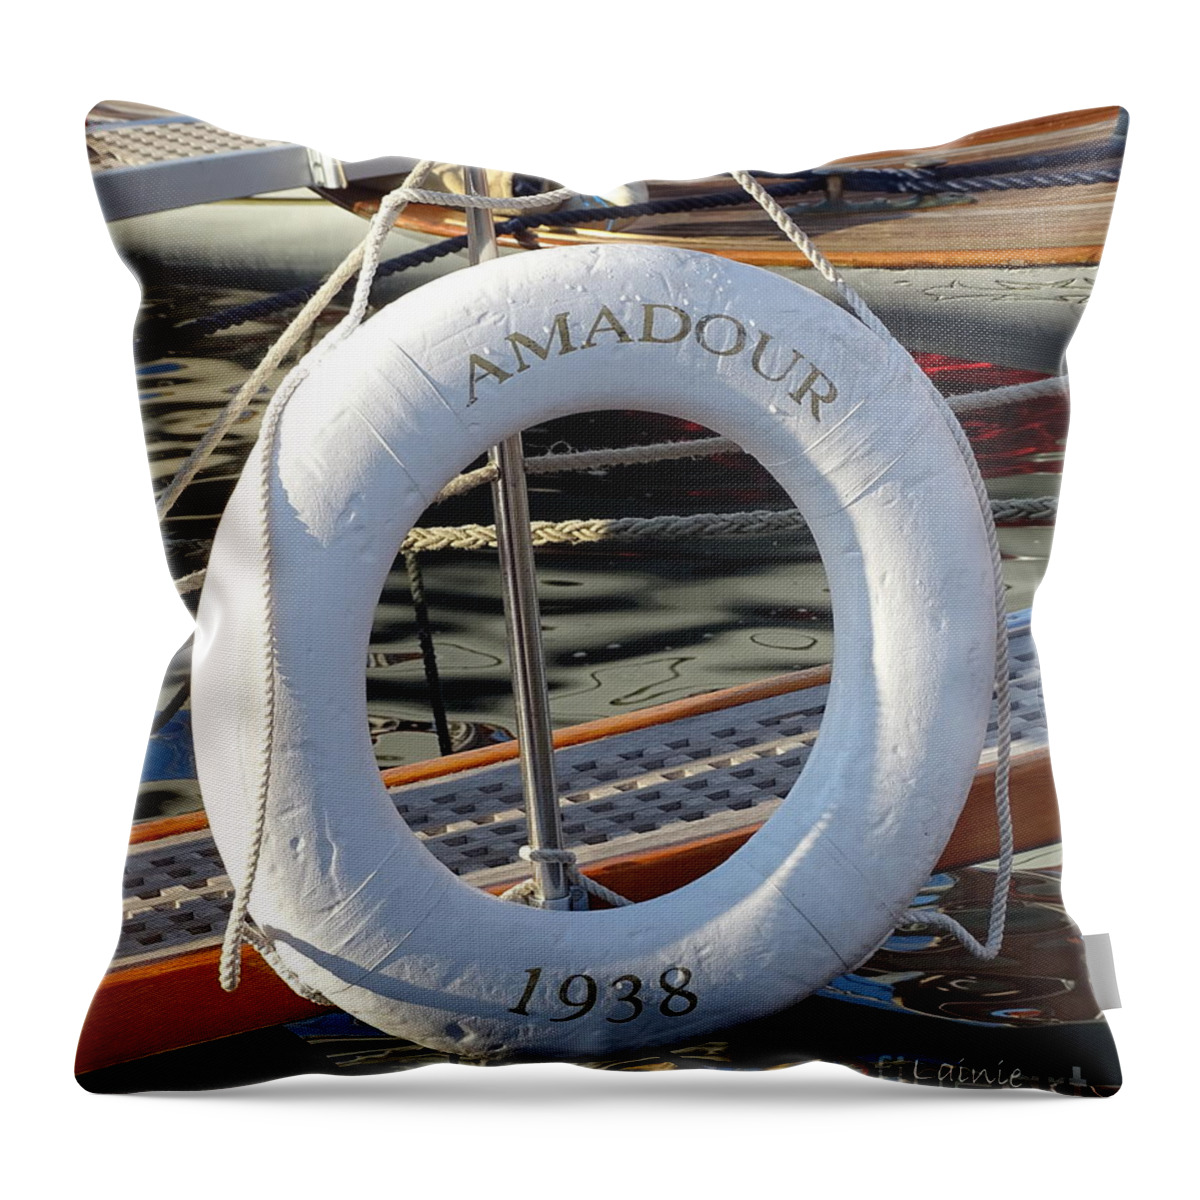  Amadour 1938 Throw Pillow featuring the photograph Amadour 1938 by Lainie Wrightson